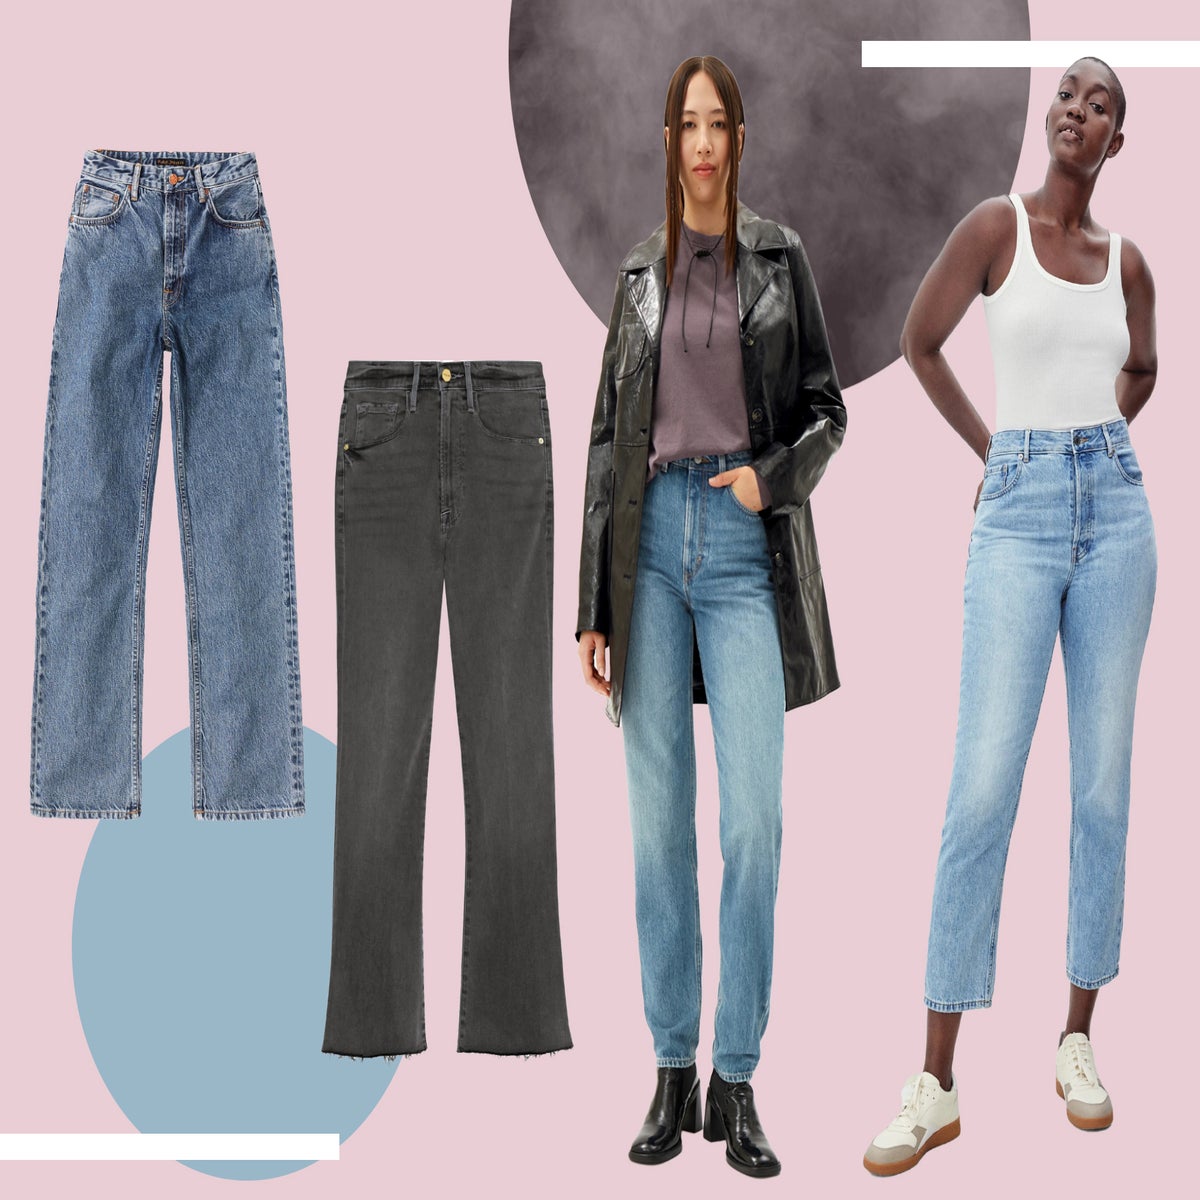 How to Wear High-Waisted Jeans - A 2022 Style Guide – Shop the Mint